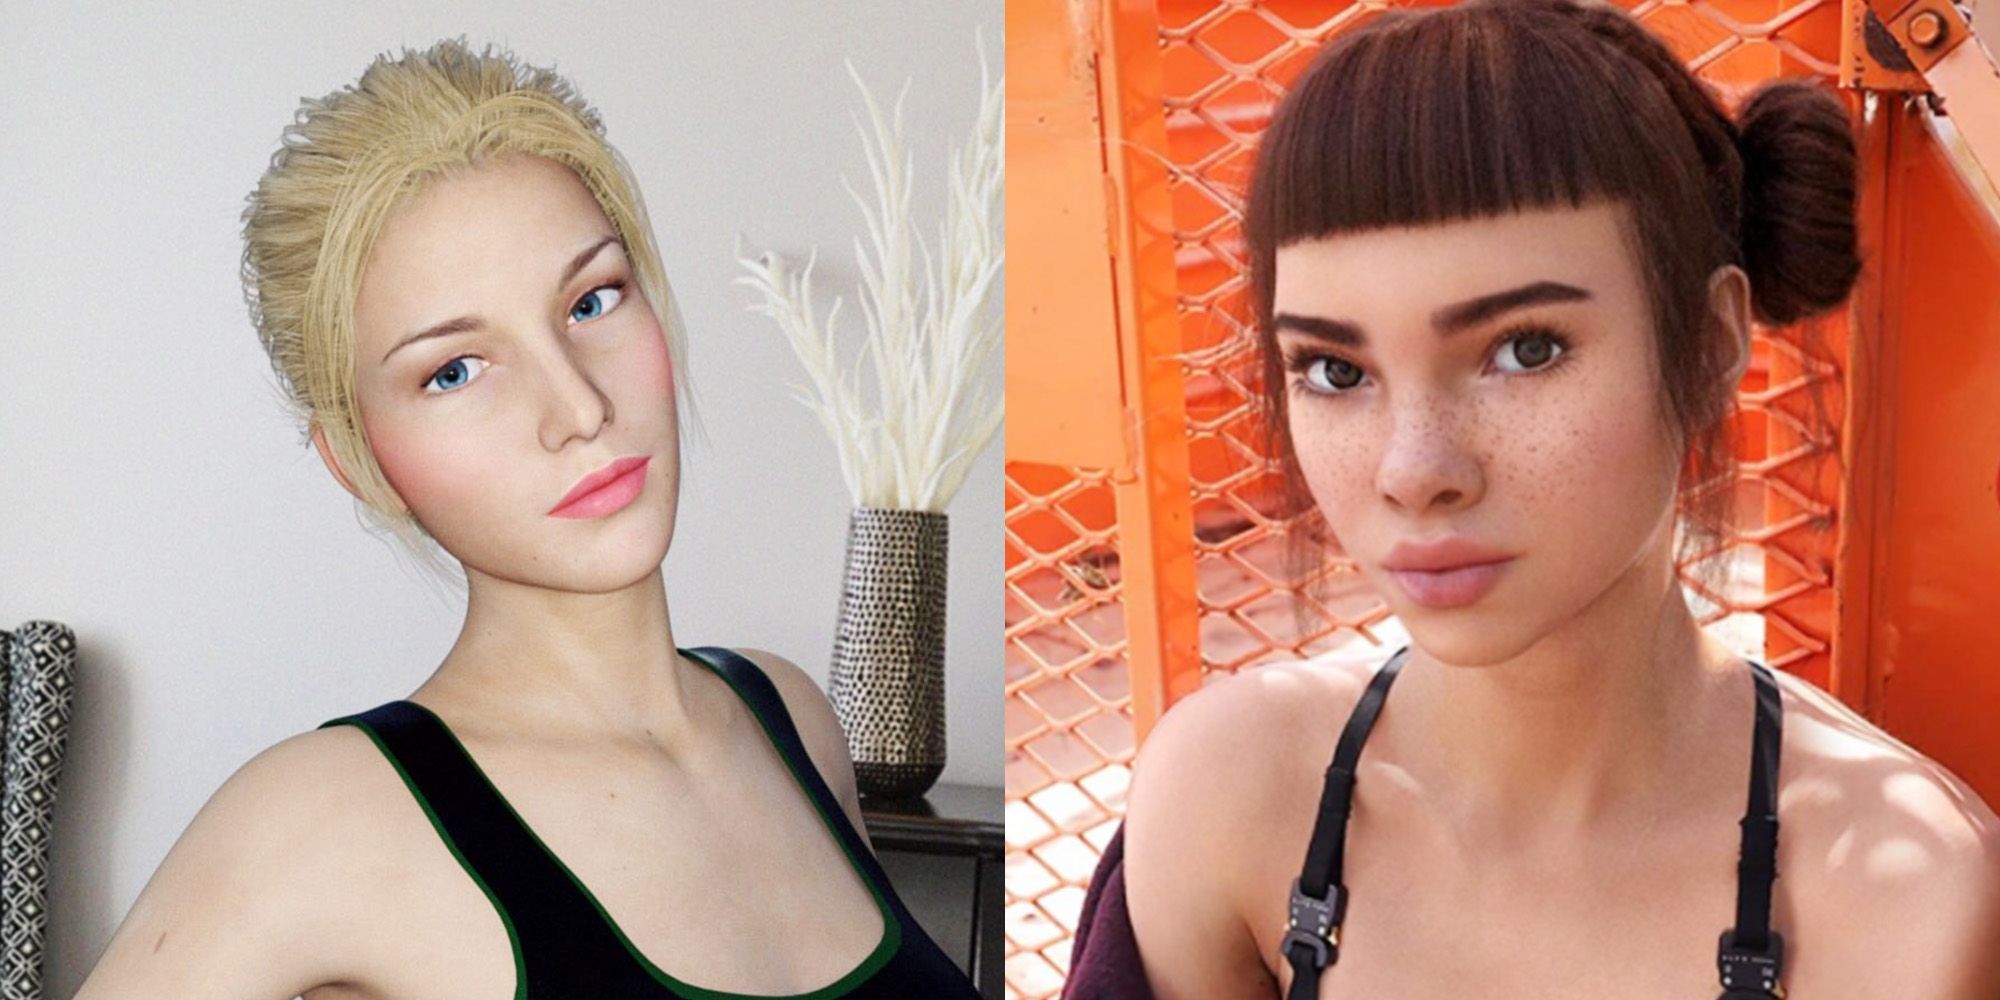 We Get of This Two 'Virtual Instagram Influencers'